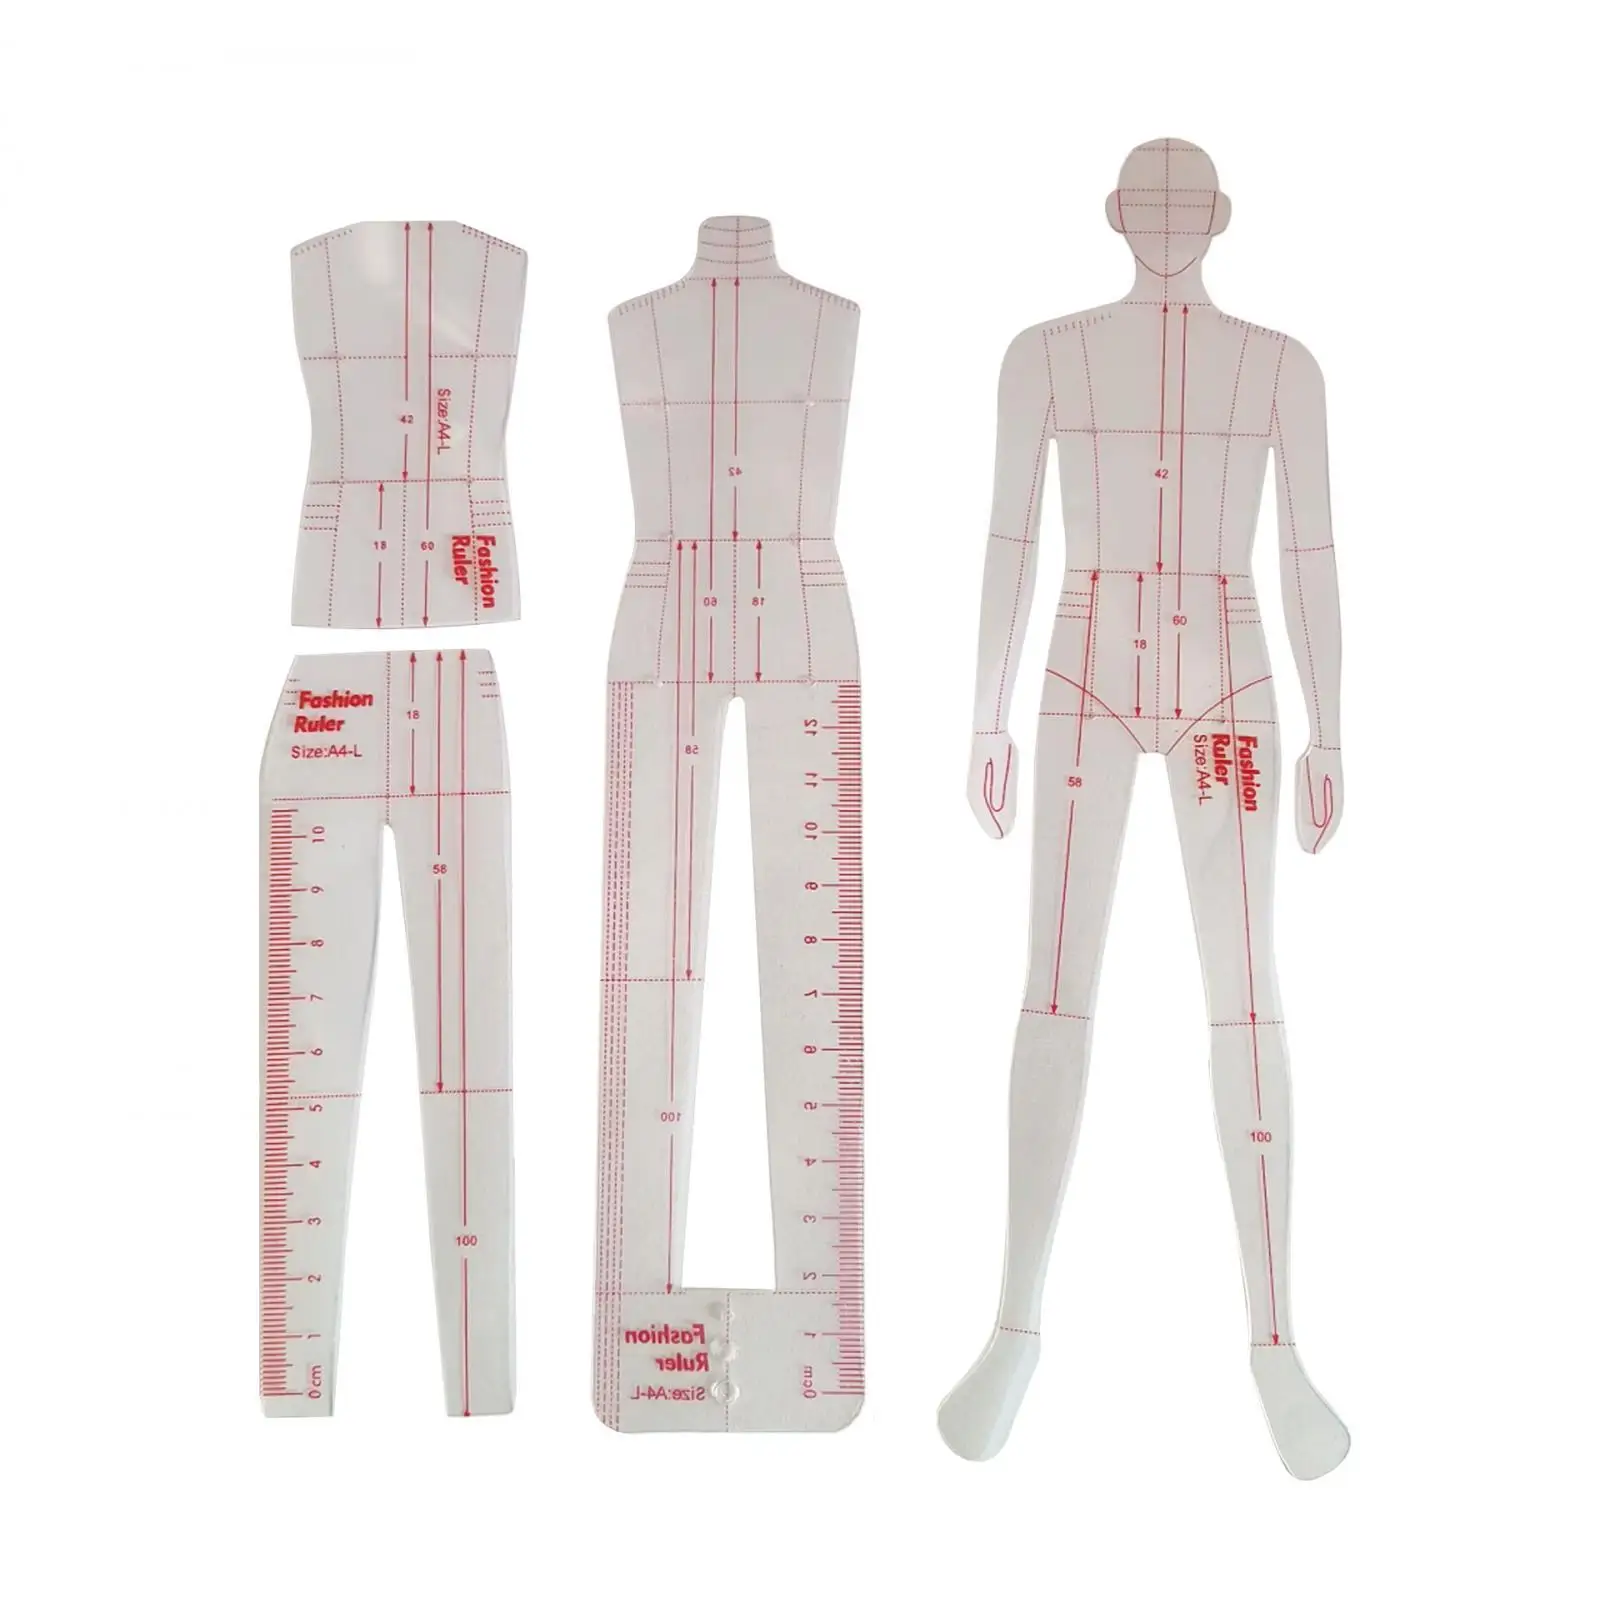 Template Ruler Clothing Measuring Garment Design Fashion Illustration Rulers for Pattern Makers Tailors Designers suits Dresses